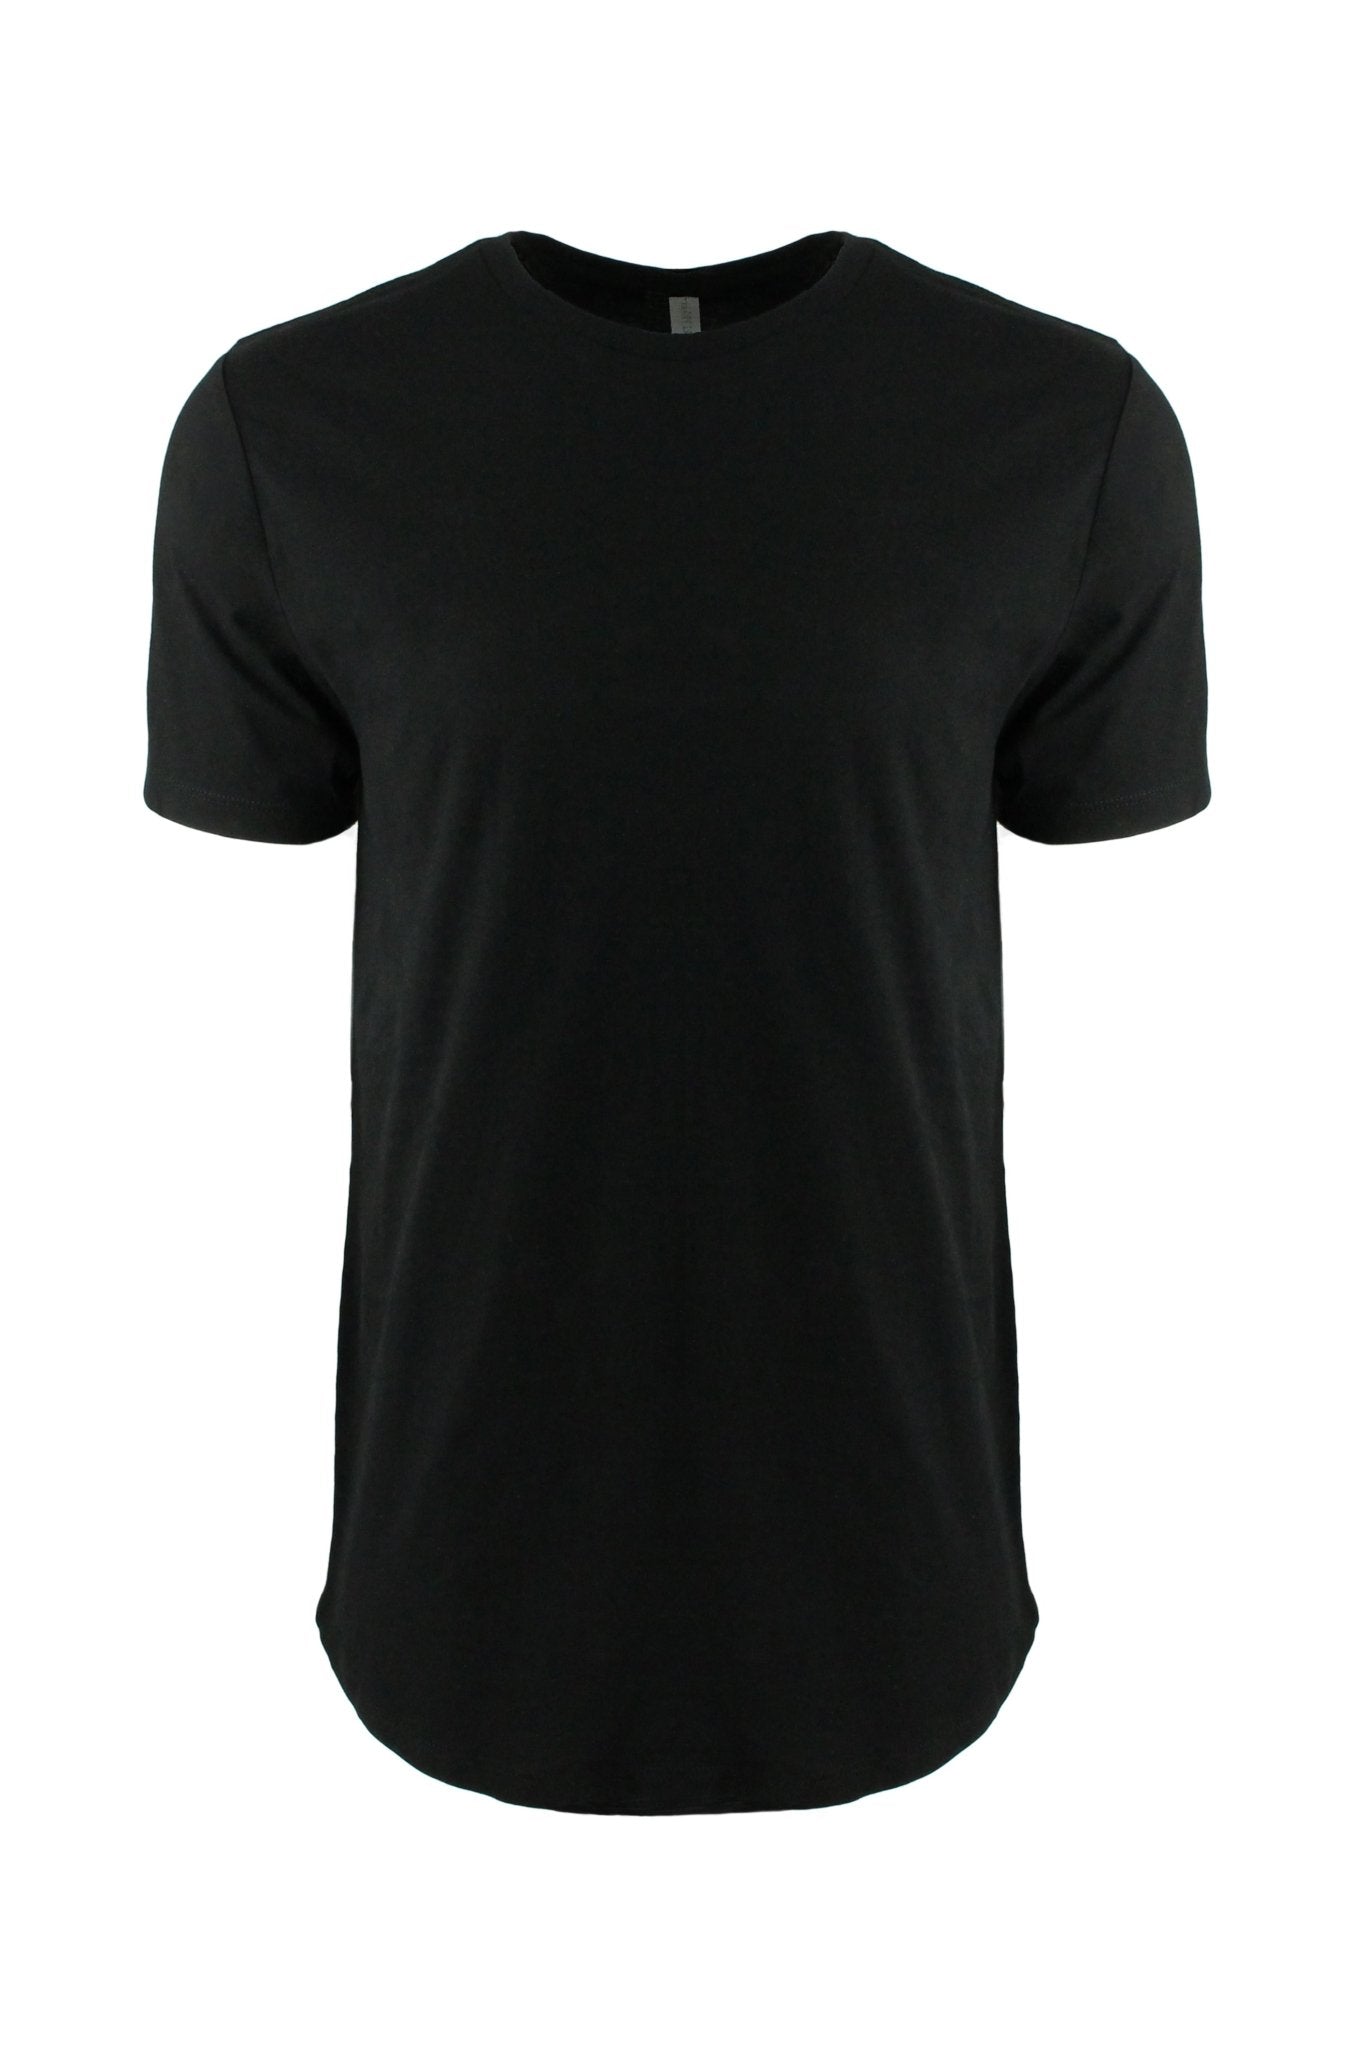 Men's LyL Basic's Long Tees | Leave Your Legacy Clothing